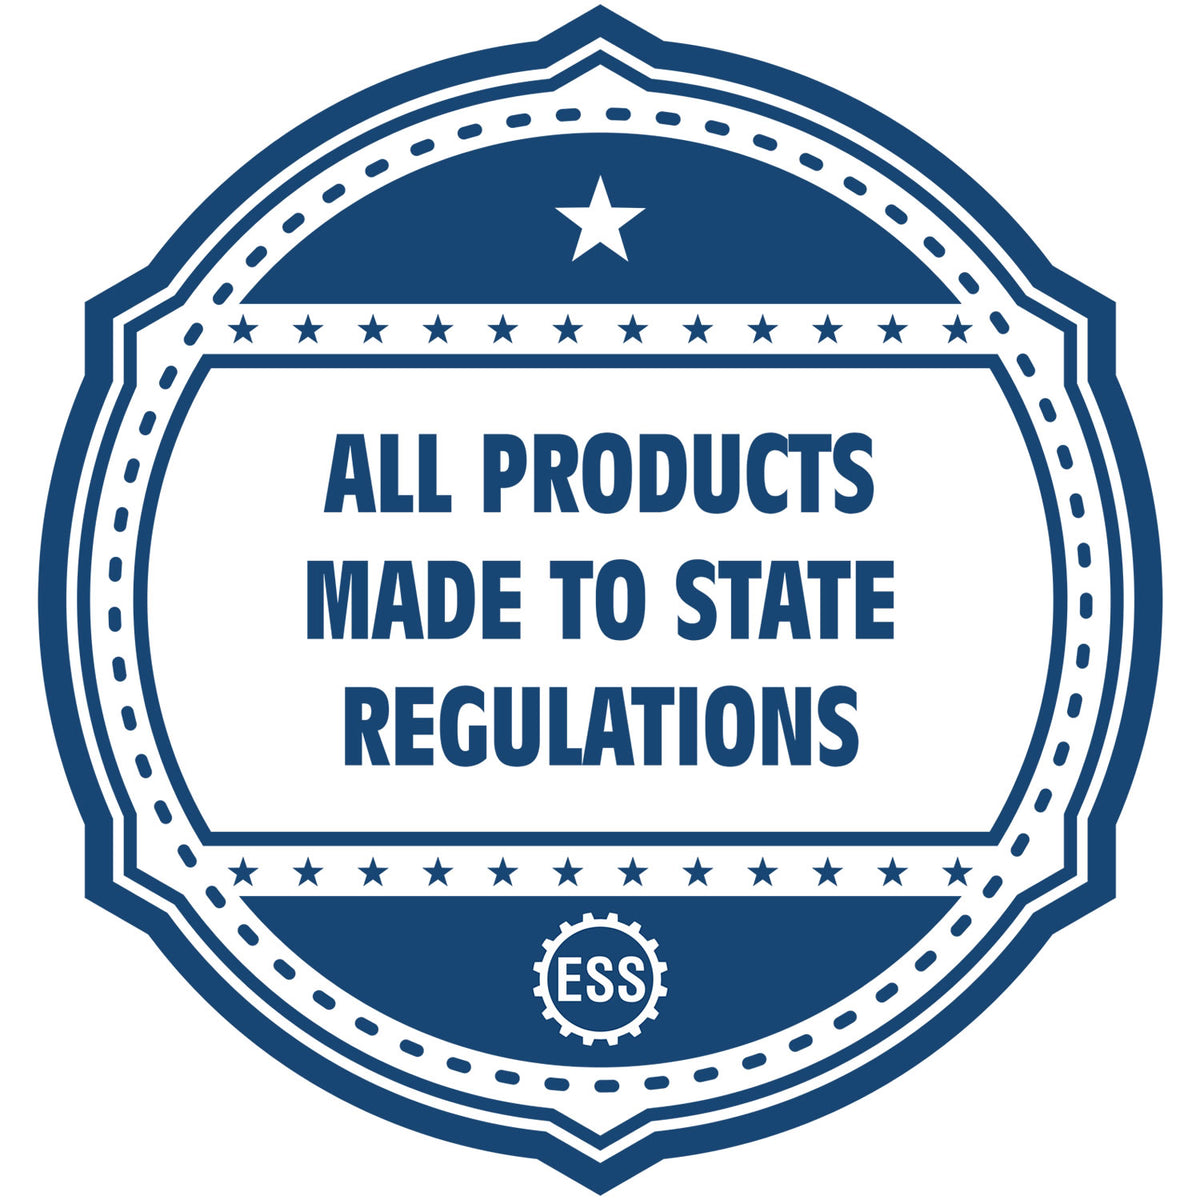 An icon or badge element for the West Virginia Professional Engineer Seal Stamp showing that this product is made in compliance with state regulations.